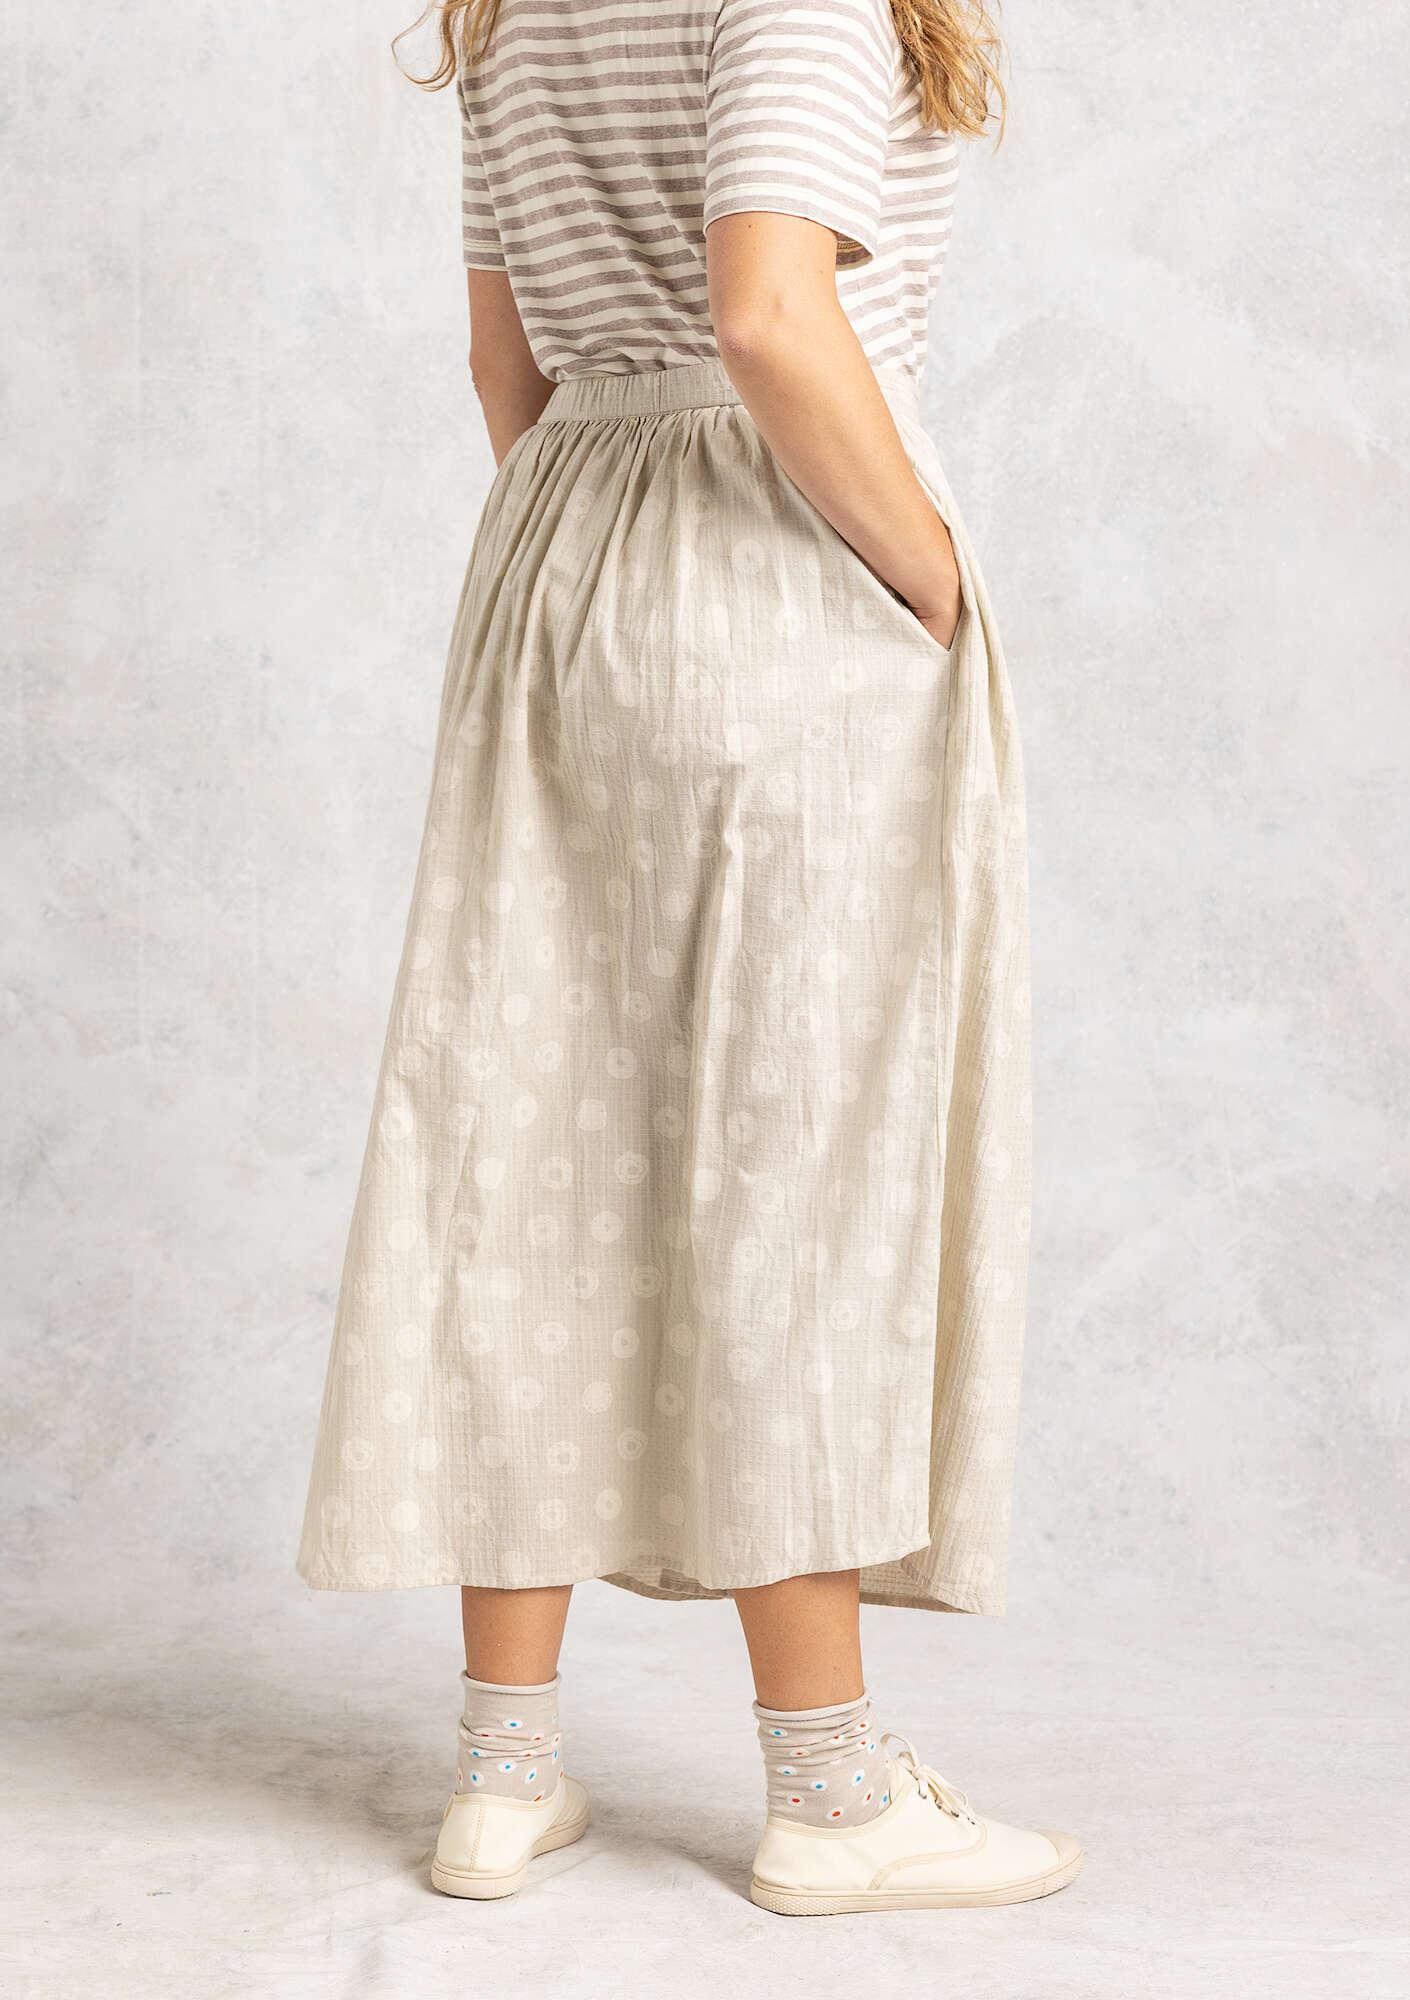 “Hilda” woven skirt in organic cotton natural/patterned thumbnail